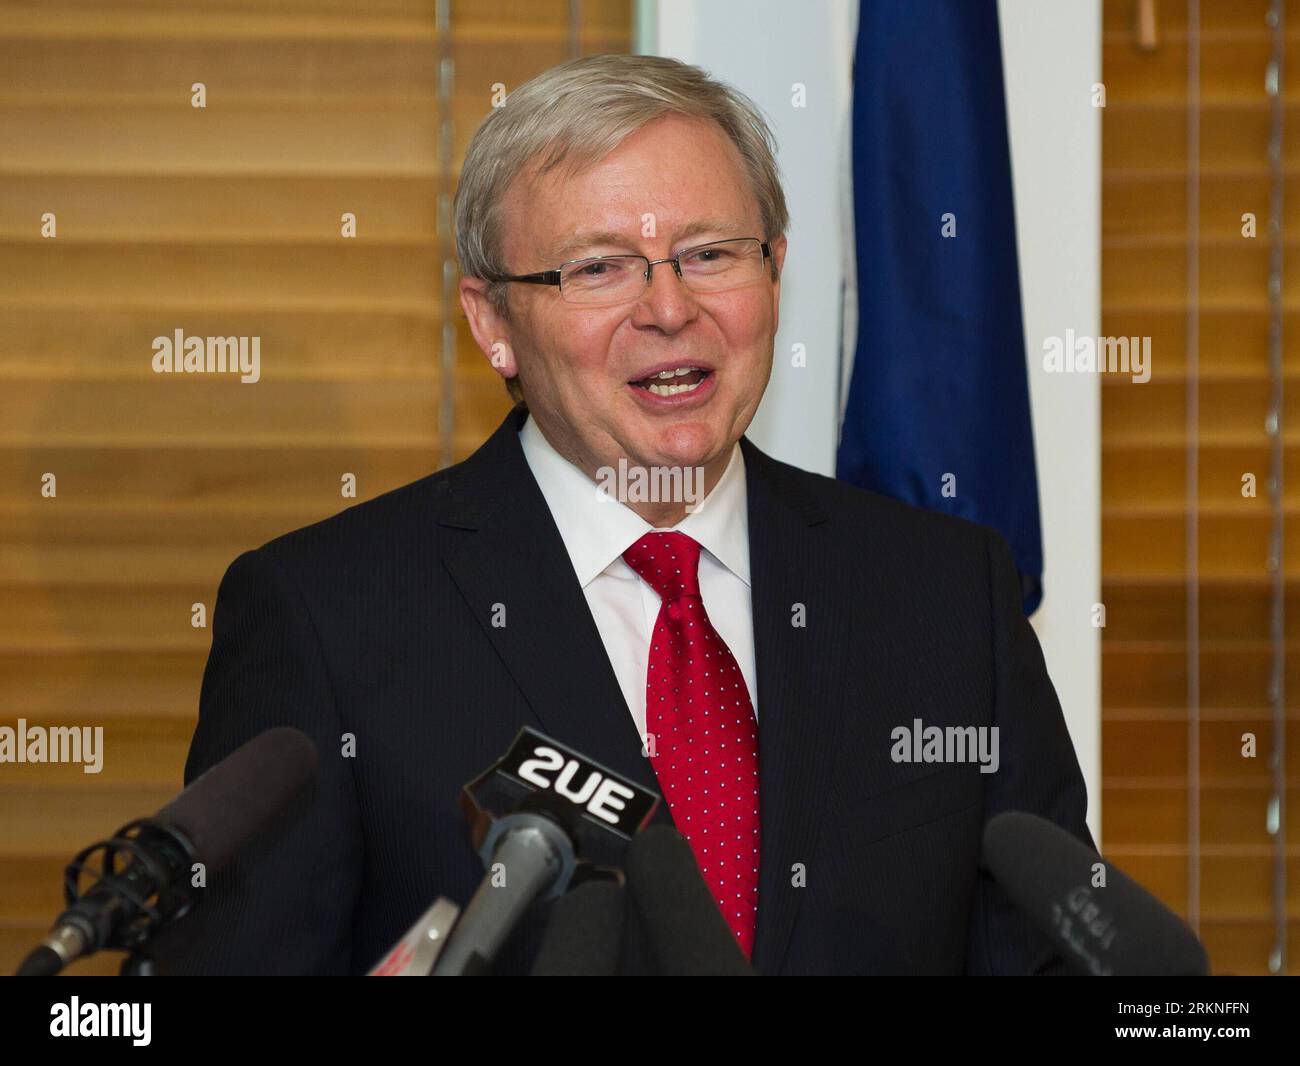 Bildnummer: 57111415  Datum: 26.02.2012  Copyright: imago/Xinhua (120227) -- CANBERRA, Feb. 27, 2012 (Xinhua) -- Former Prime Minister and Foreign Minister Kevin Rudd speaks at a press conference after Australian Prime Minister Julia Gillard wins the Labor ballot vote in Canberra, Australia, Feb. 27, 2012. Kevin Rudd said here Monday he congratulated current leader of the ruling Labor party Julia Gillard on her strong win and he bore no grudges. (Xinhua/Bai Xue) (zyw) AUSTRALIA-CANBERRA-LABOR CAUCUS PUBLICATIONxNOTxINxCHN PEople Politik premiumd xsp x0x 2012 quer      57111415 Date 26 02 2012 Stock Photo